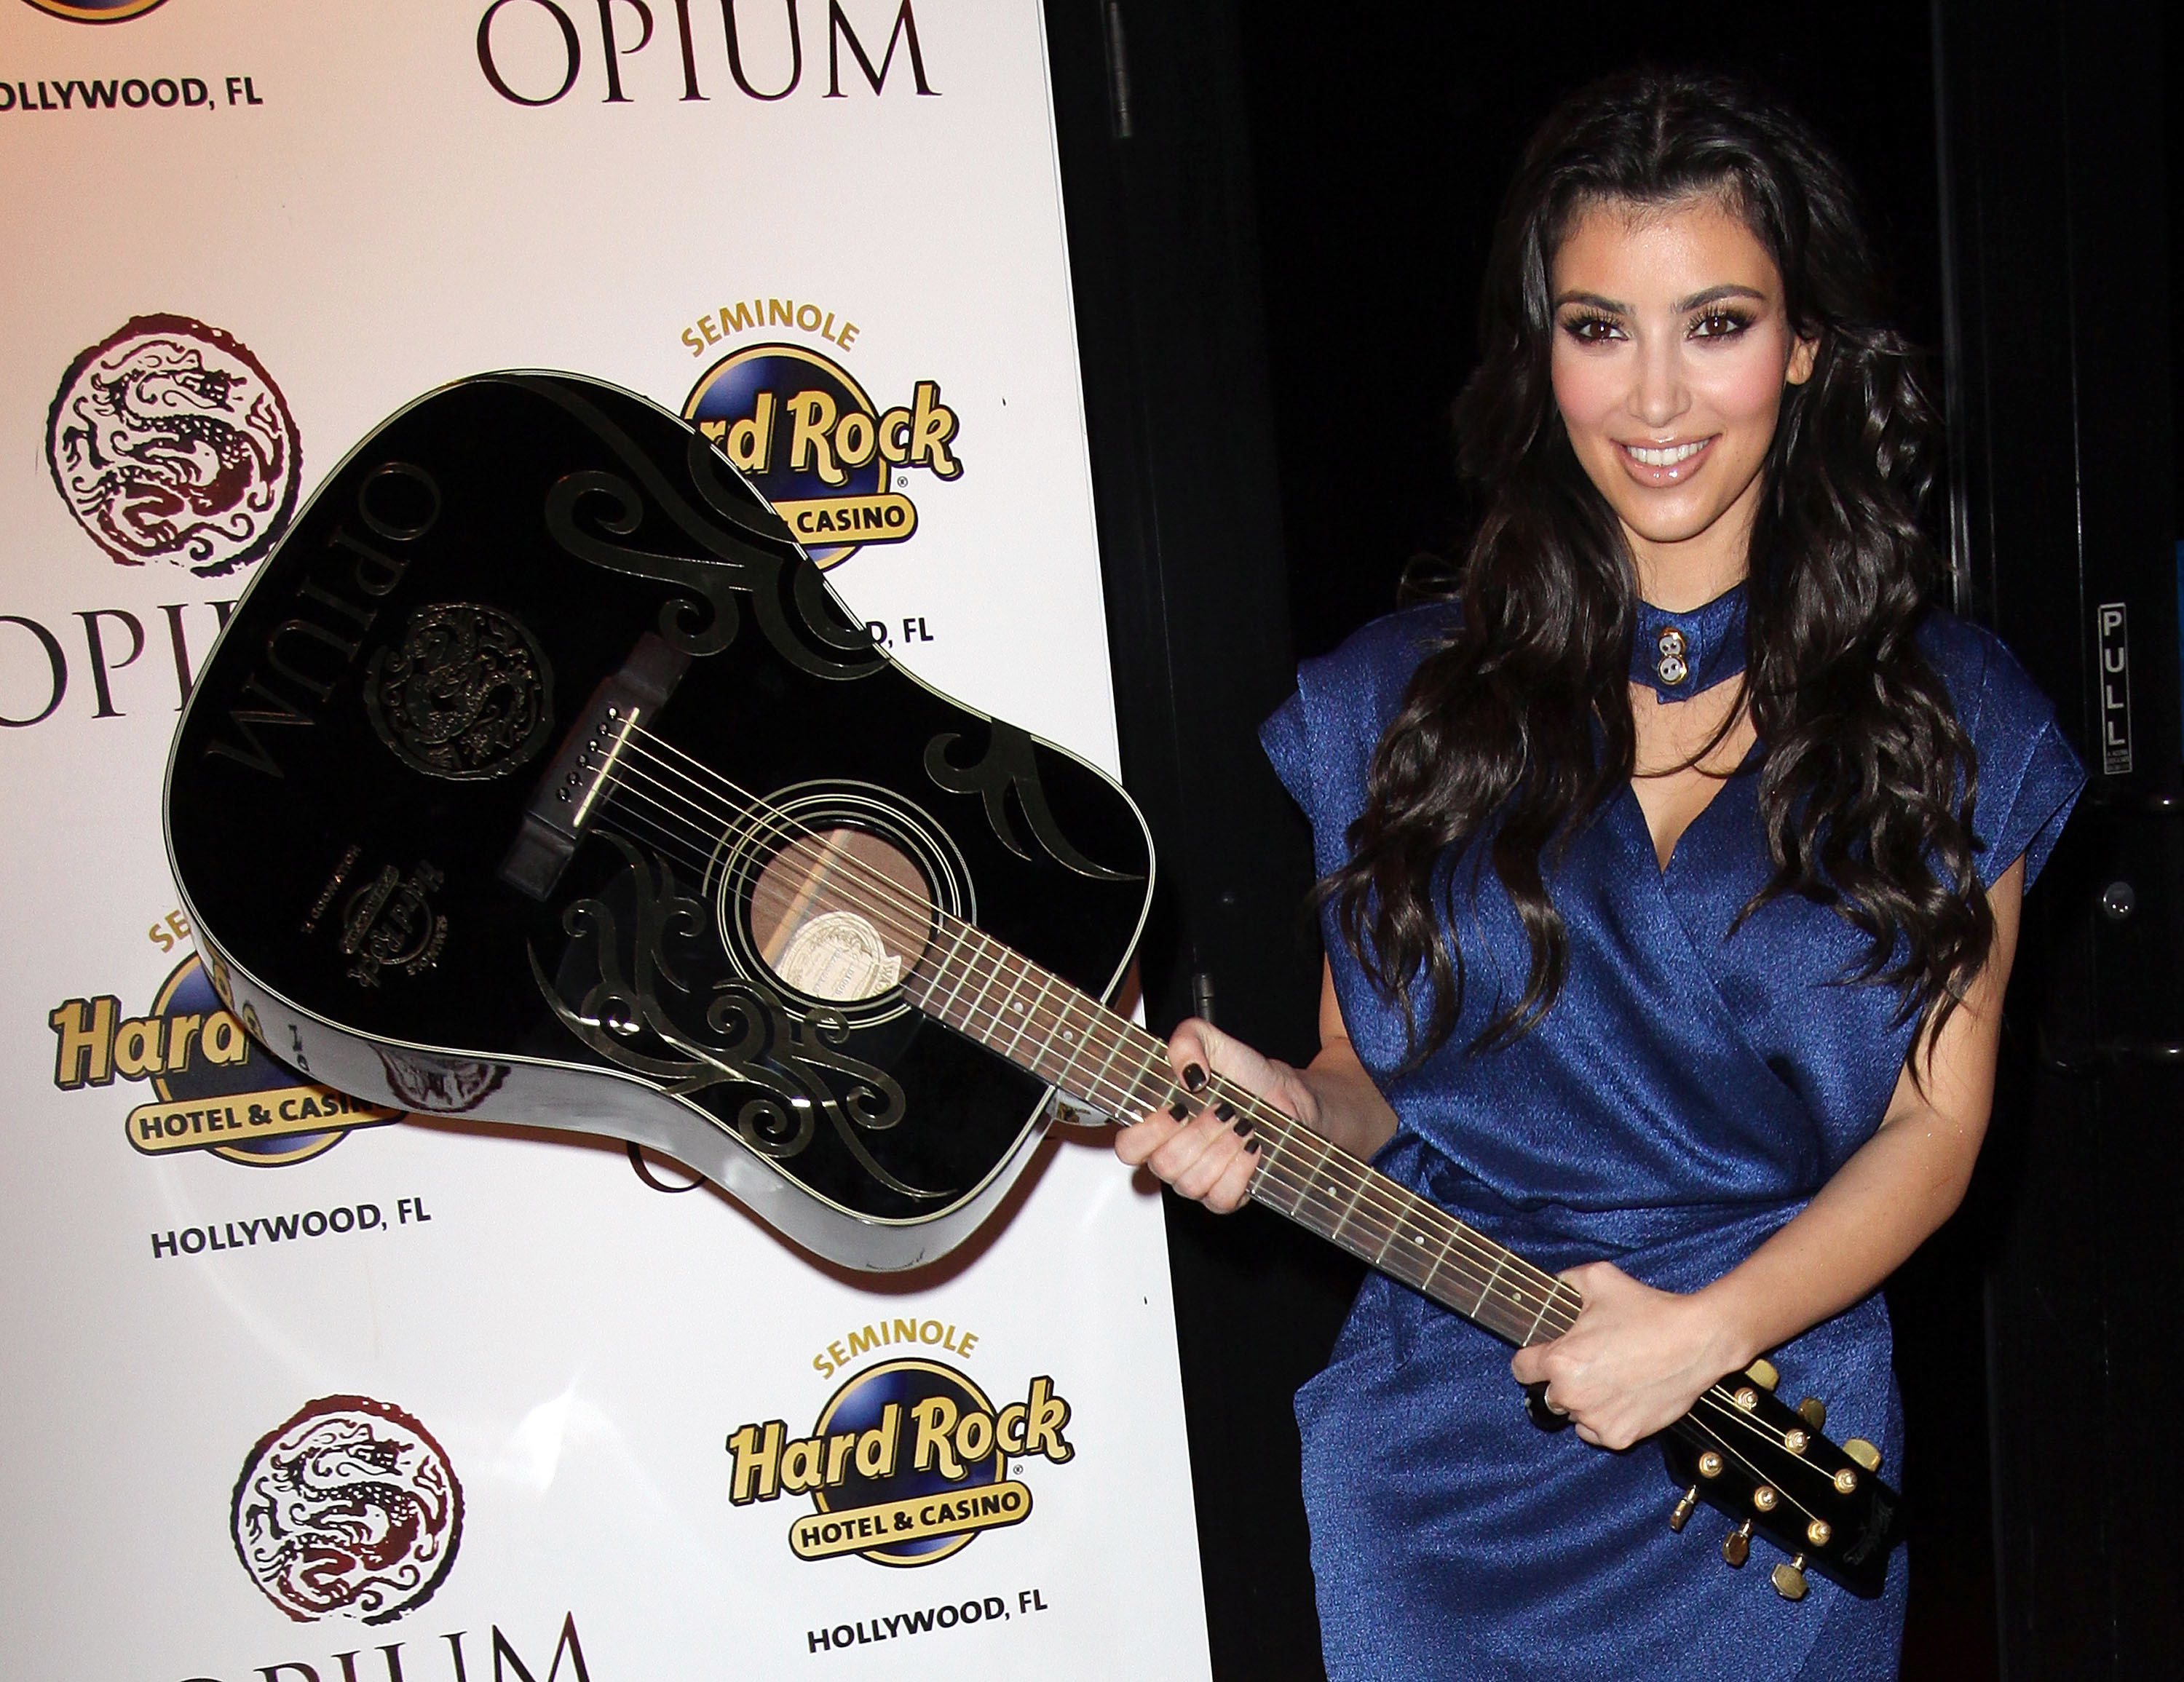 Kim holding a guitar by the head instead of the base